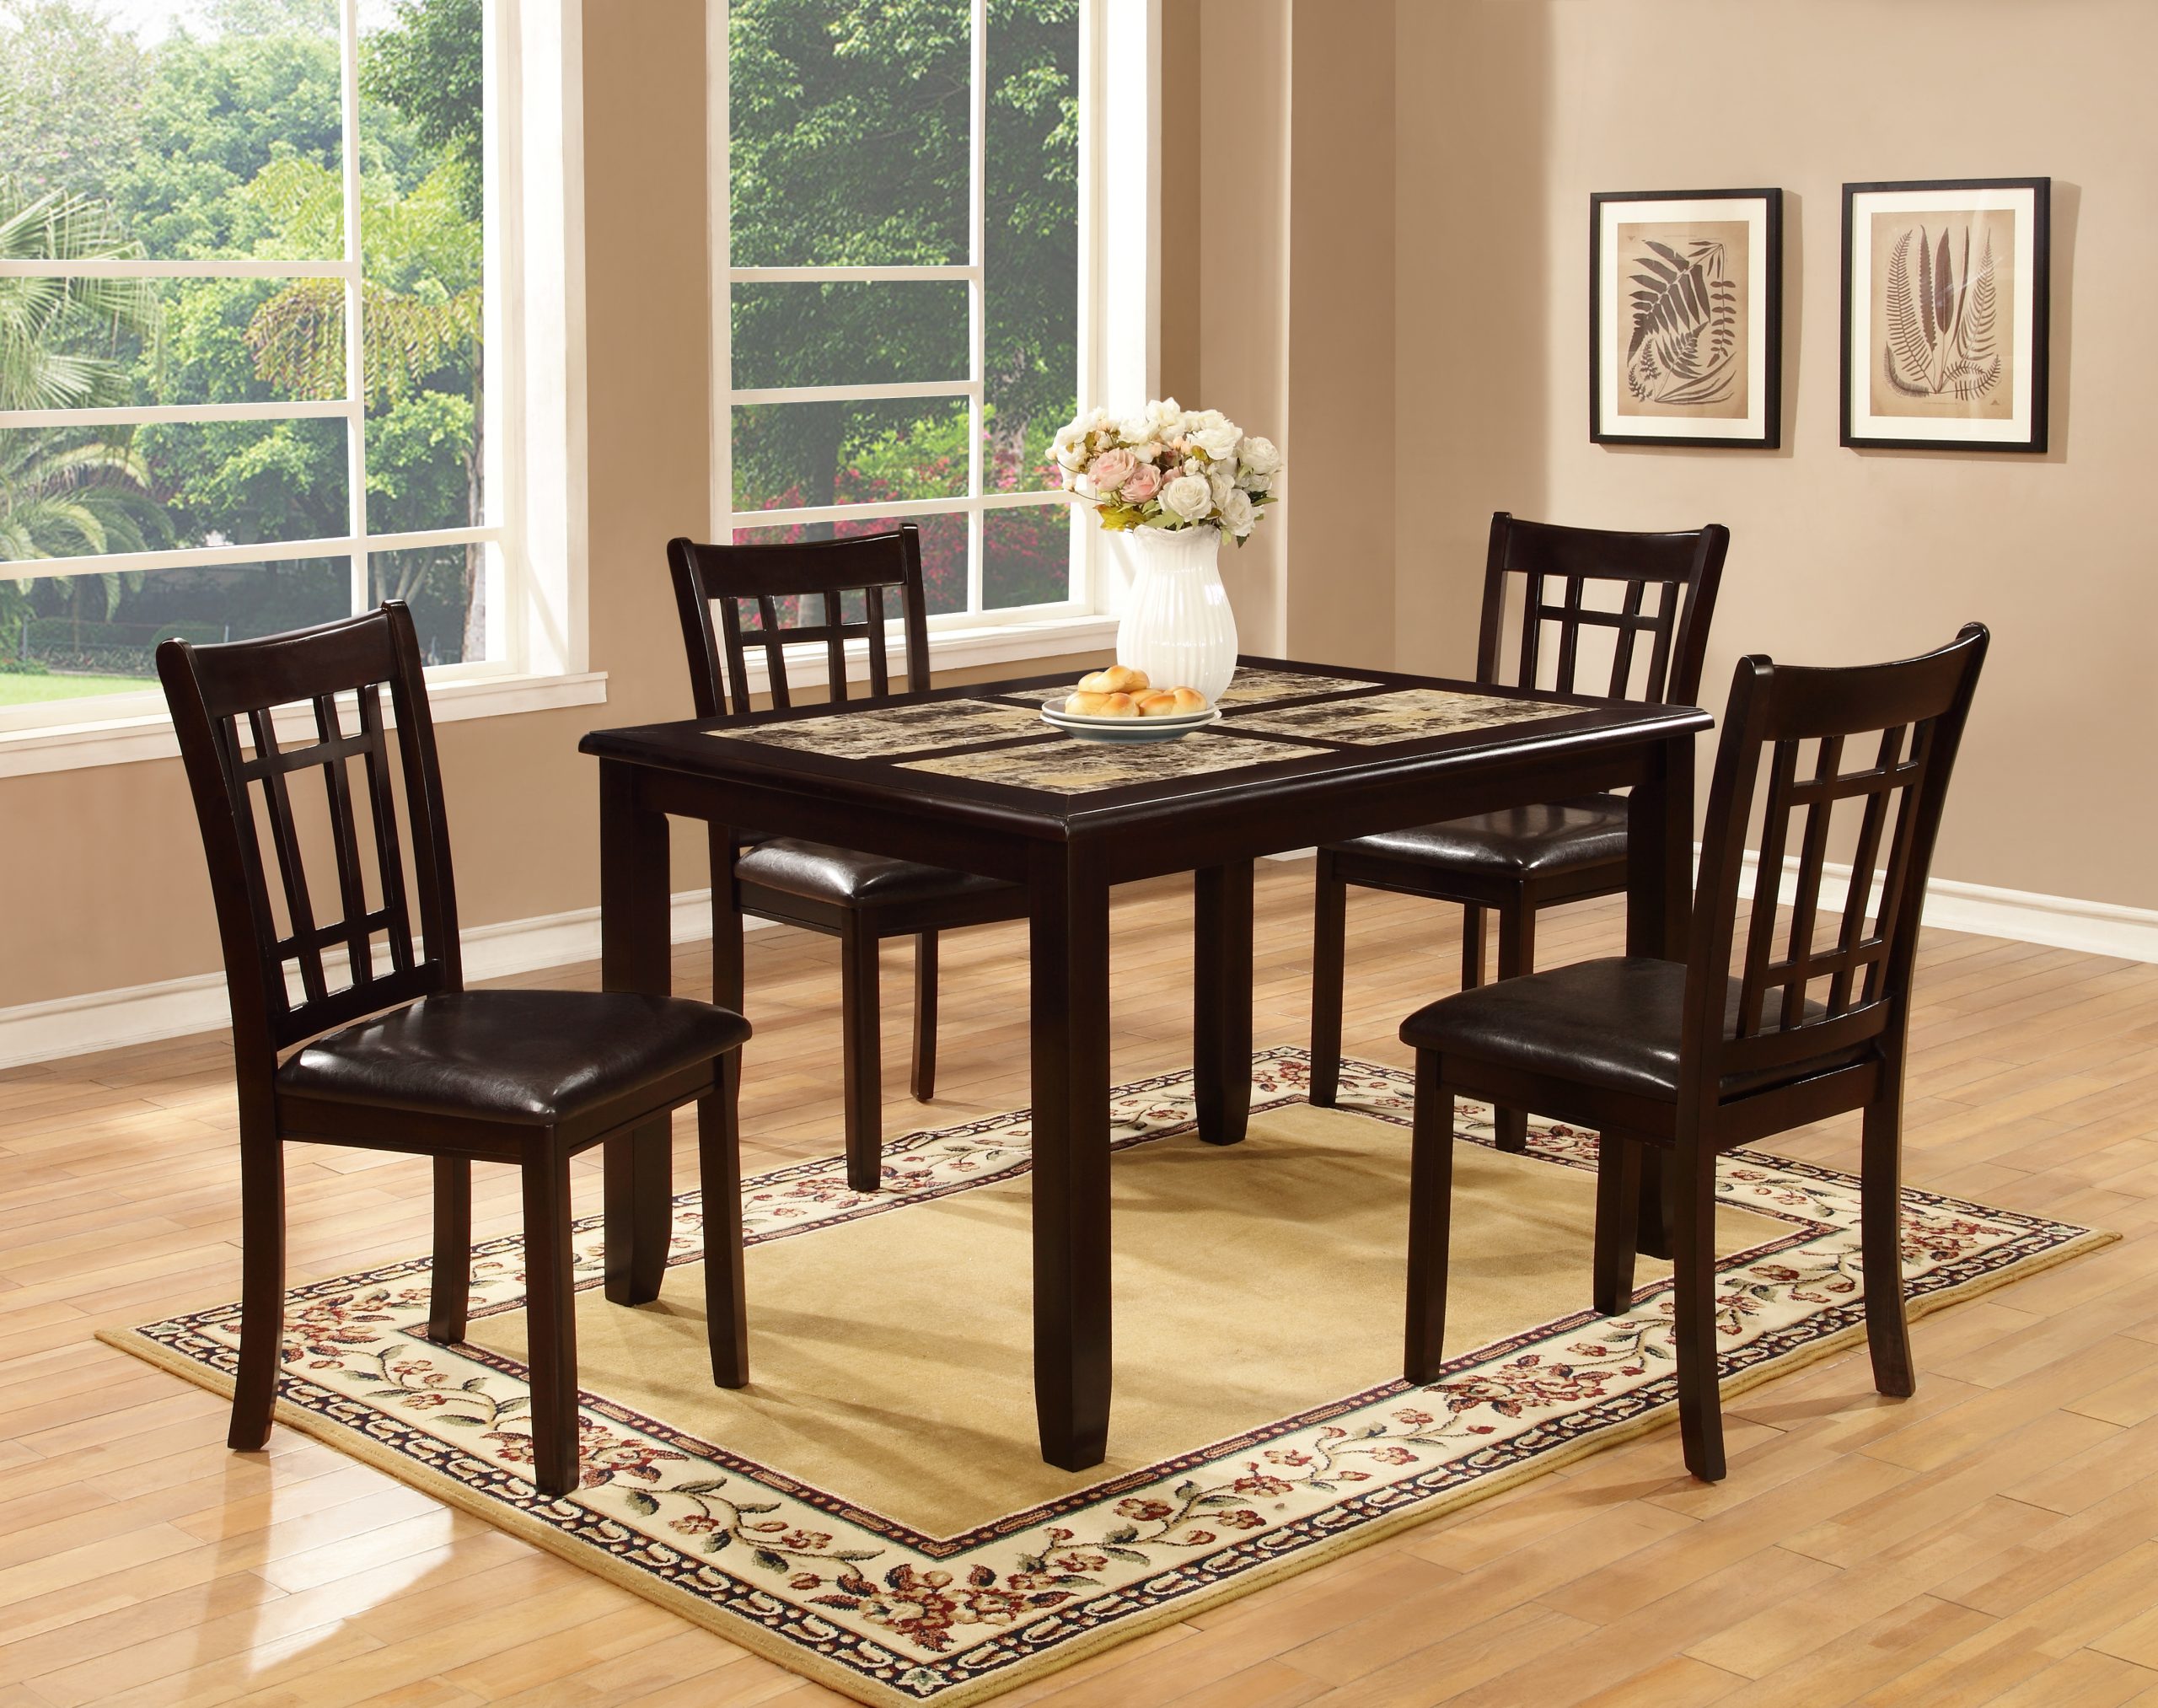 DINETTE TABLE 4 CHAIRS